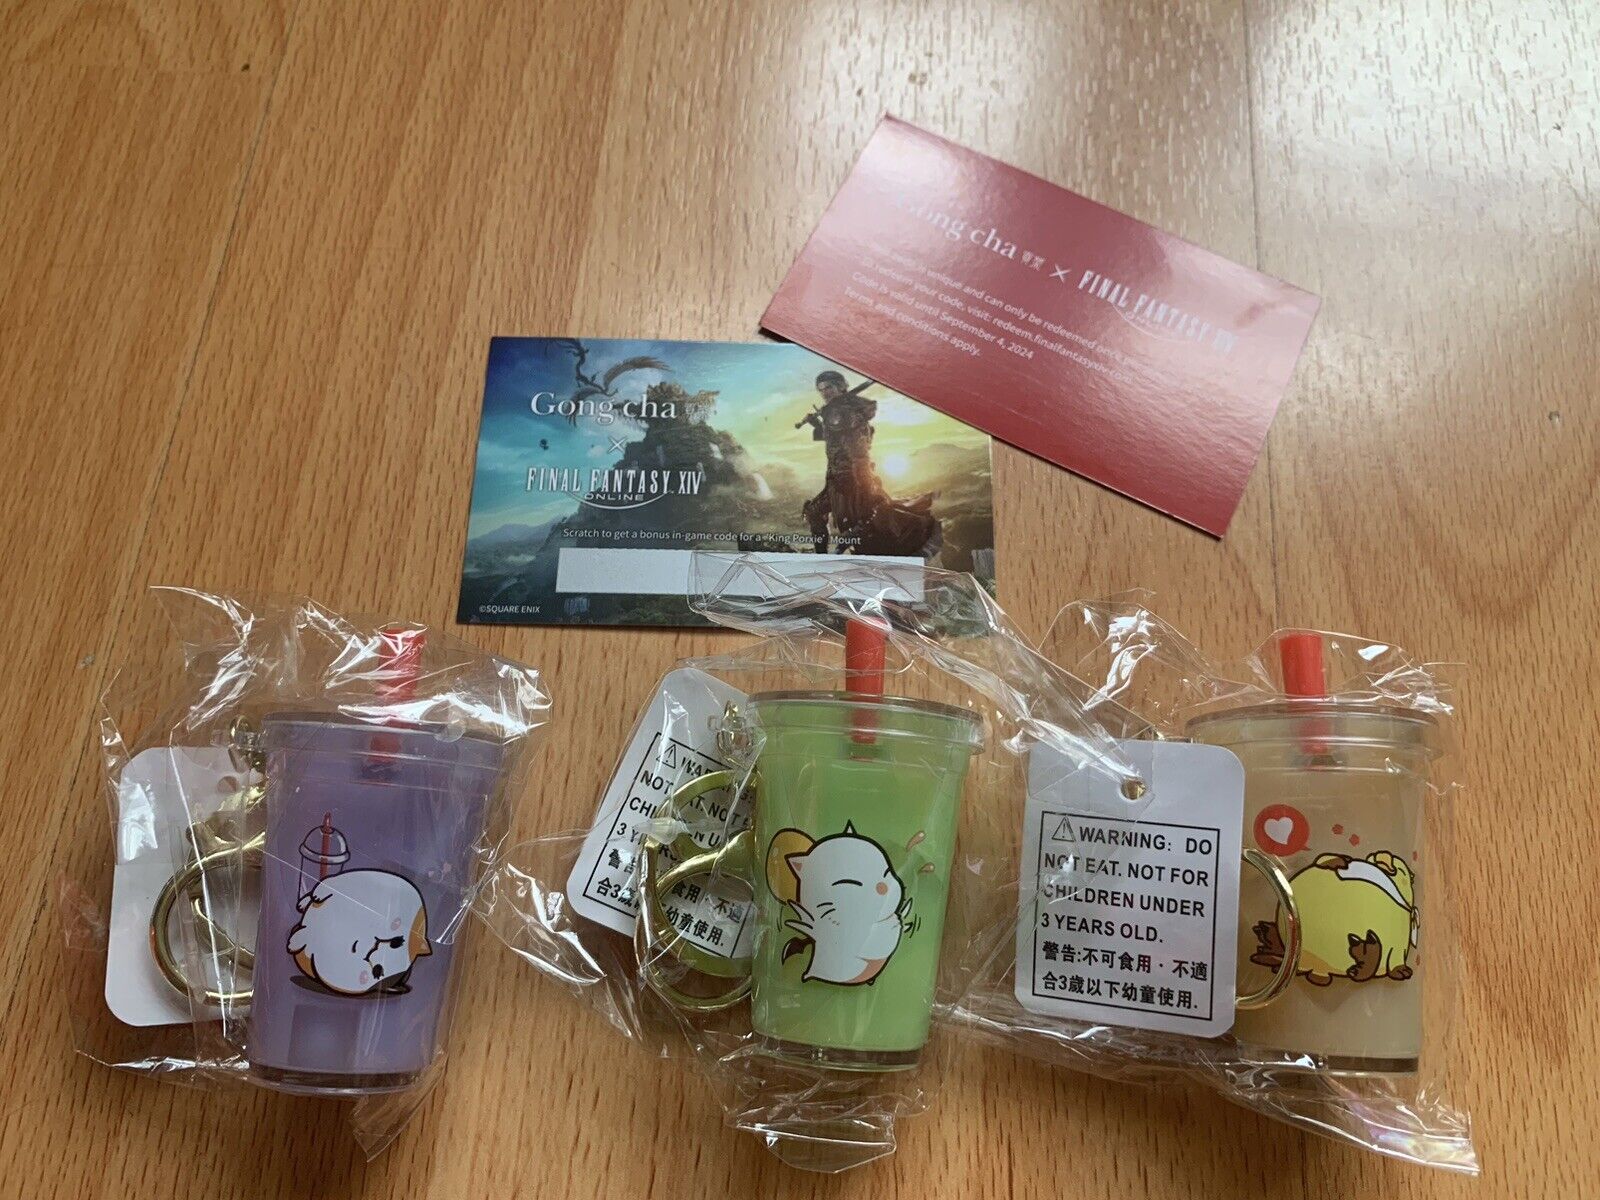 Final Fantasy Gong Cha Keychains And Porxie Scratch Card Full Set